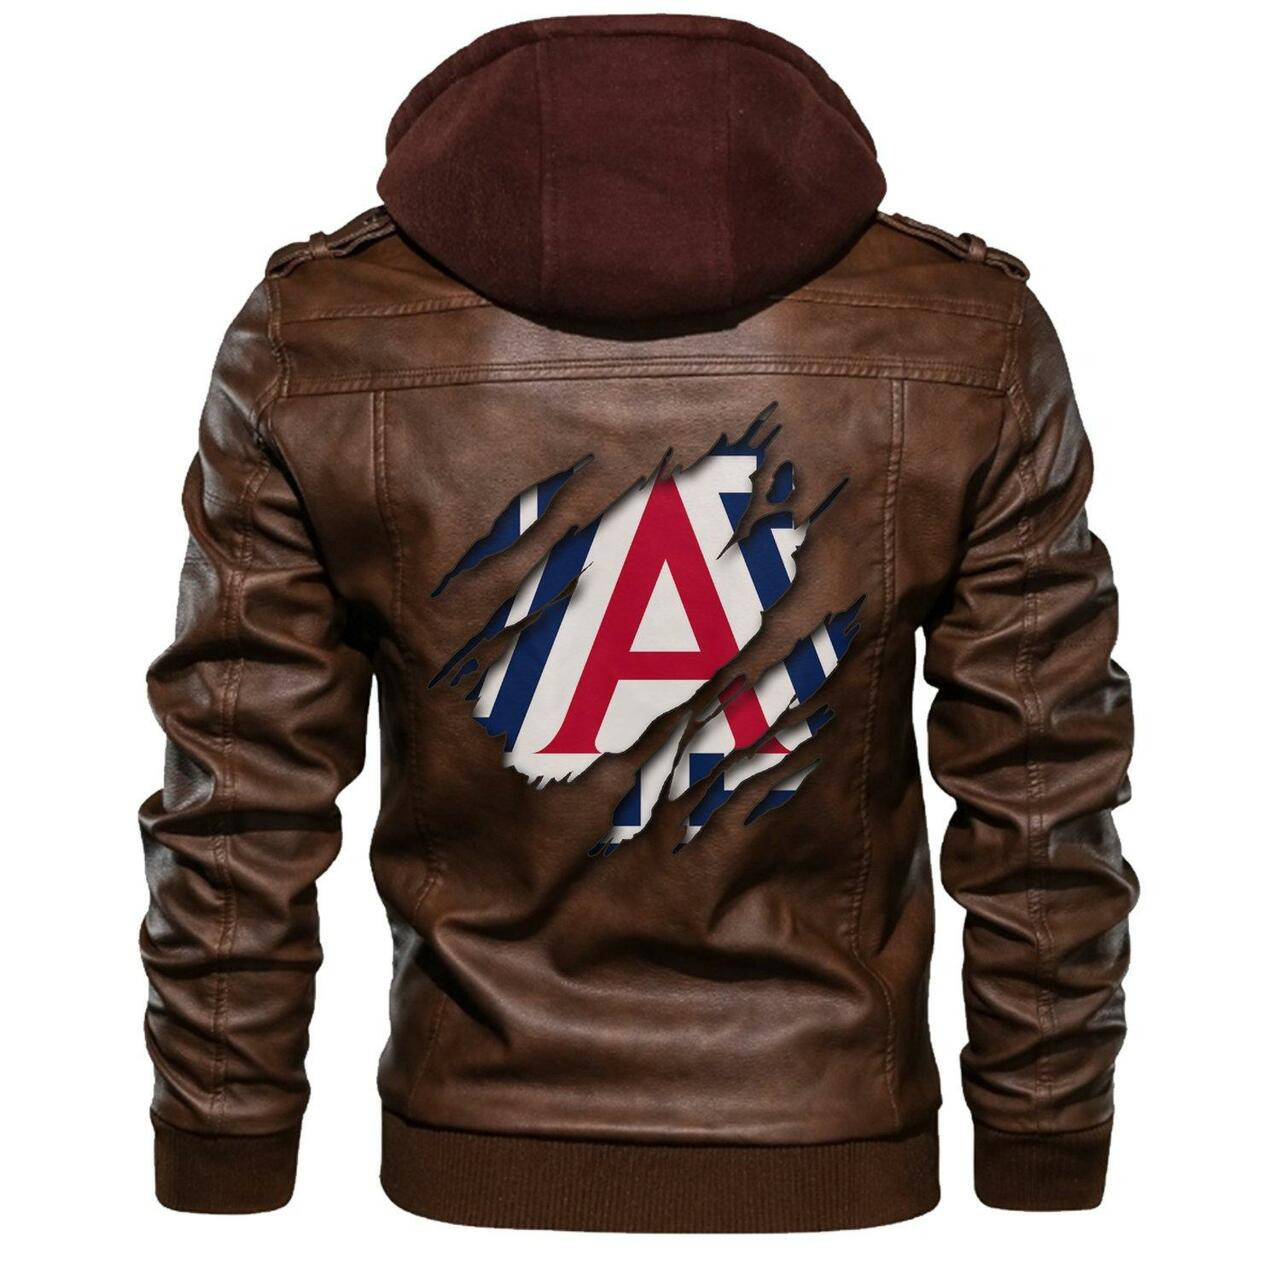 Are you looking for a great leather jacket? 146